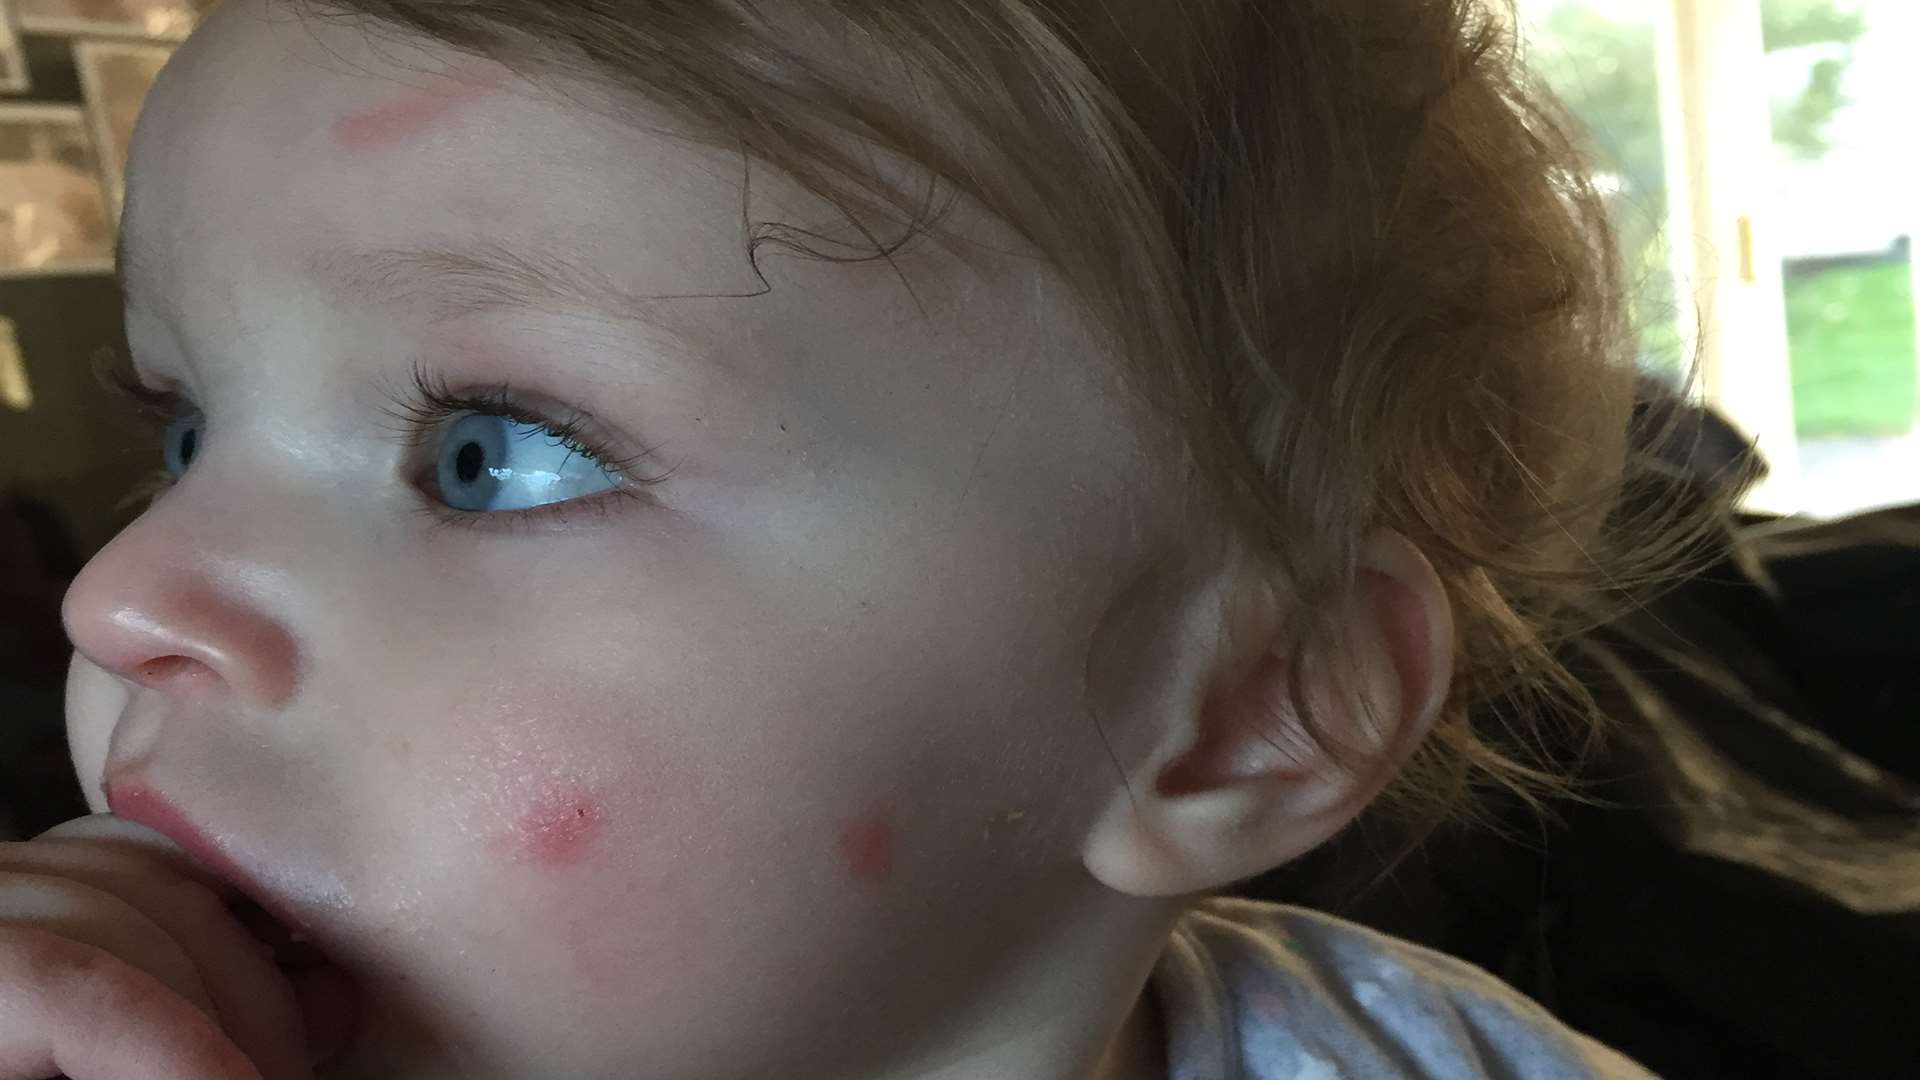 Amelia escaped with just a few scratches to her face when the tree branch crashed down onto the pushchair